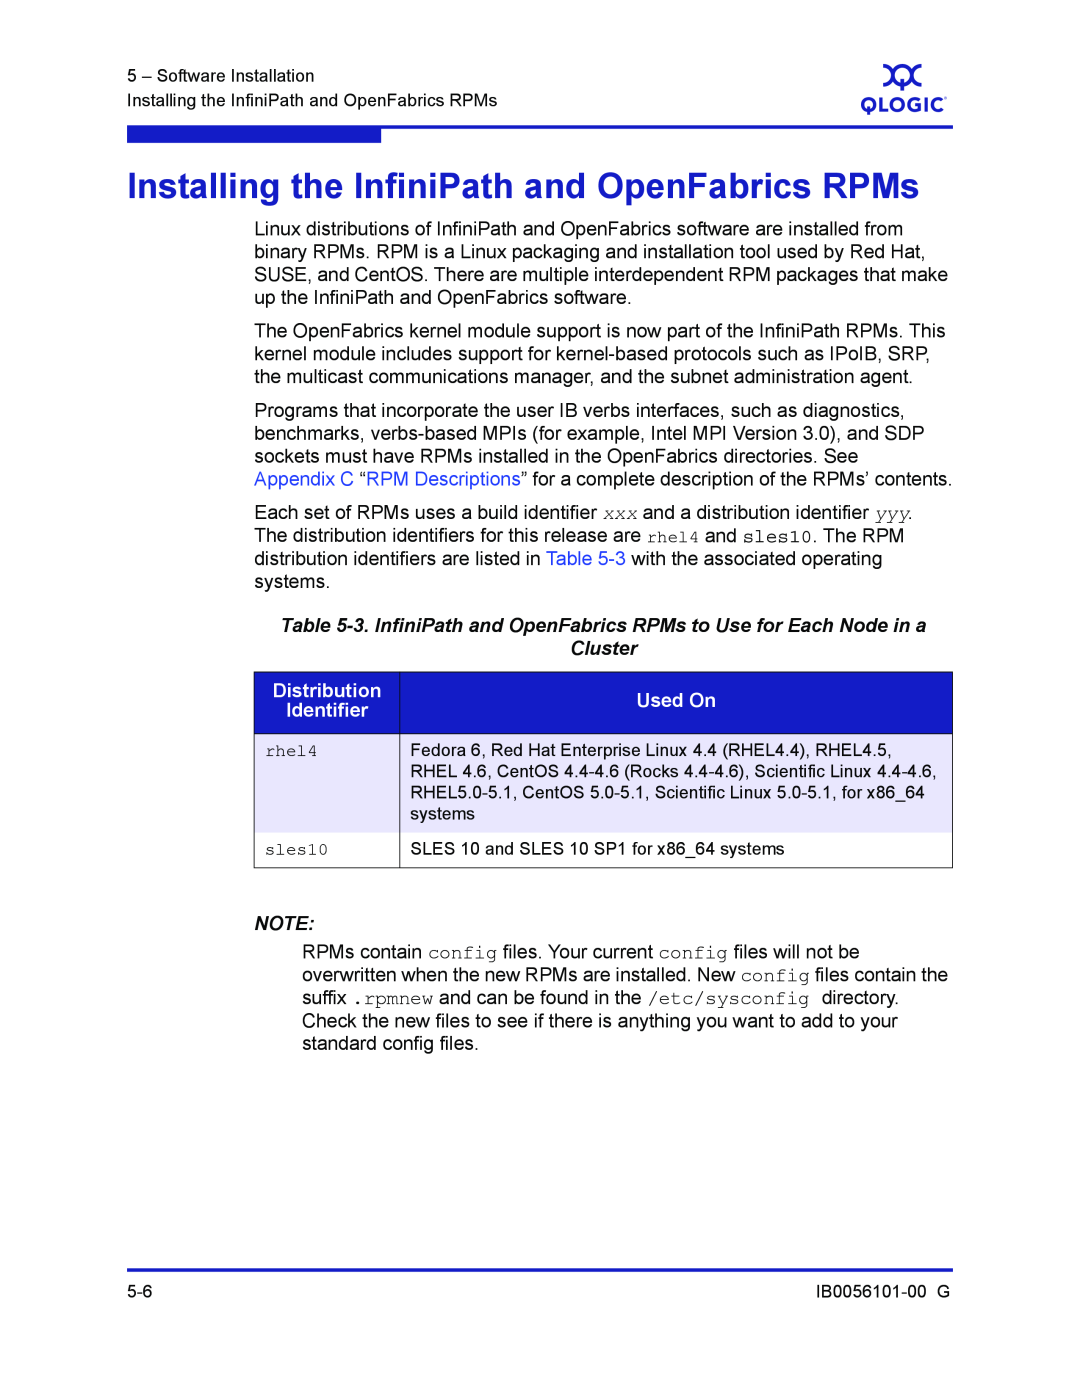 Q-Logic IB0056101-00 G manual Installing the InfiniPath and OpenFabrics RPMs, Cluster, Used On, Distribution 